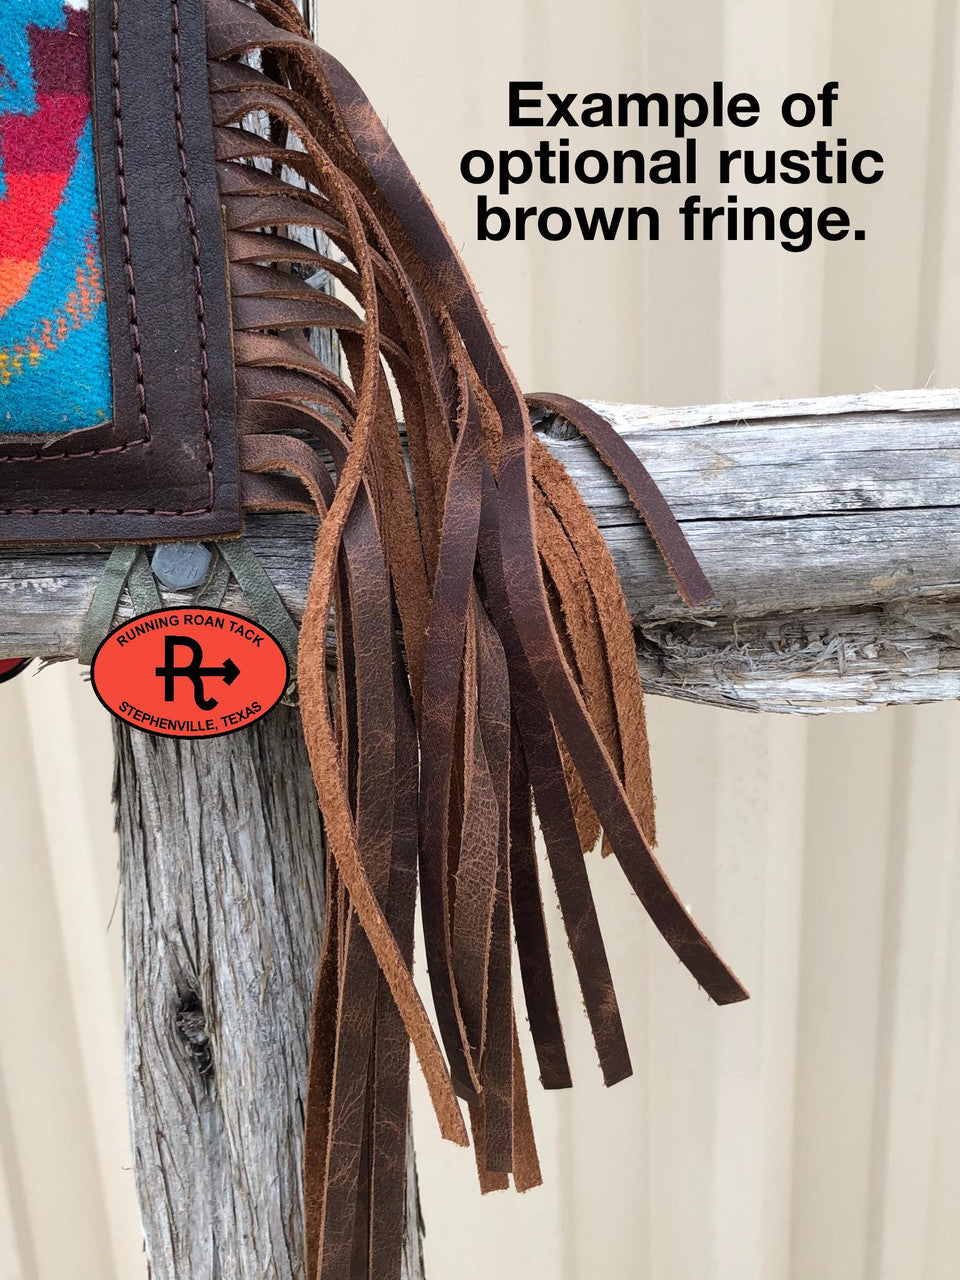 Bronze Tipped Snake Mini Saddle Bag with Your Choice of Buckle and Fringe for Phone, Keys, Roping Powder, etc